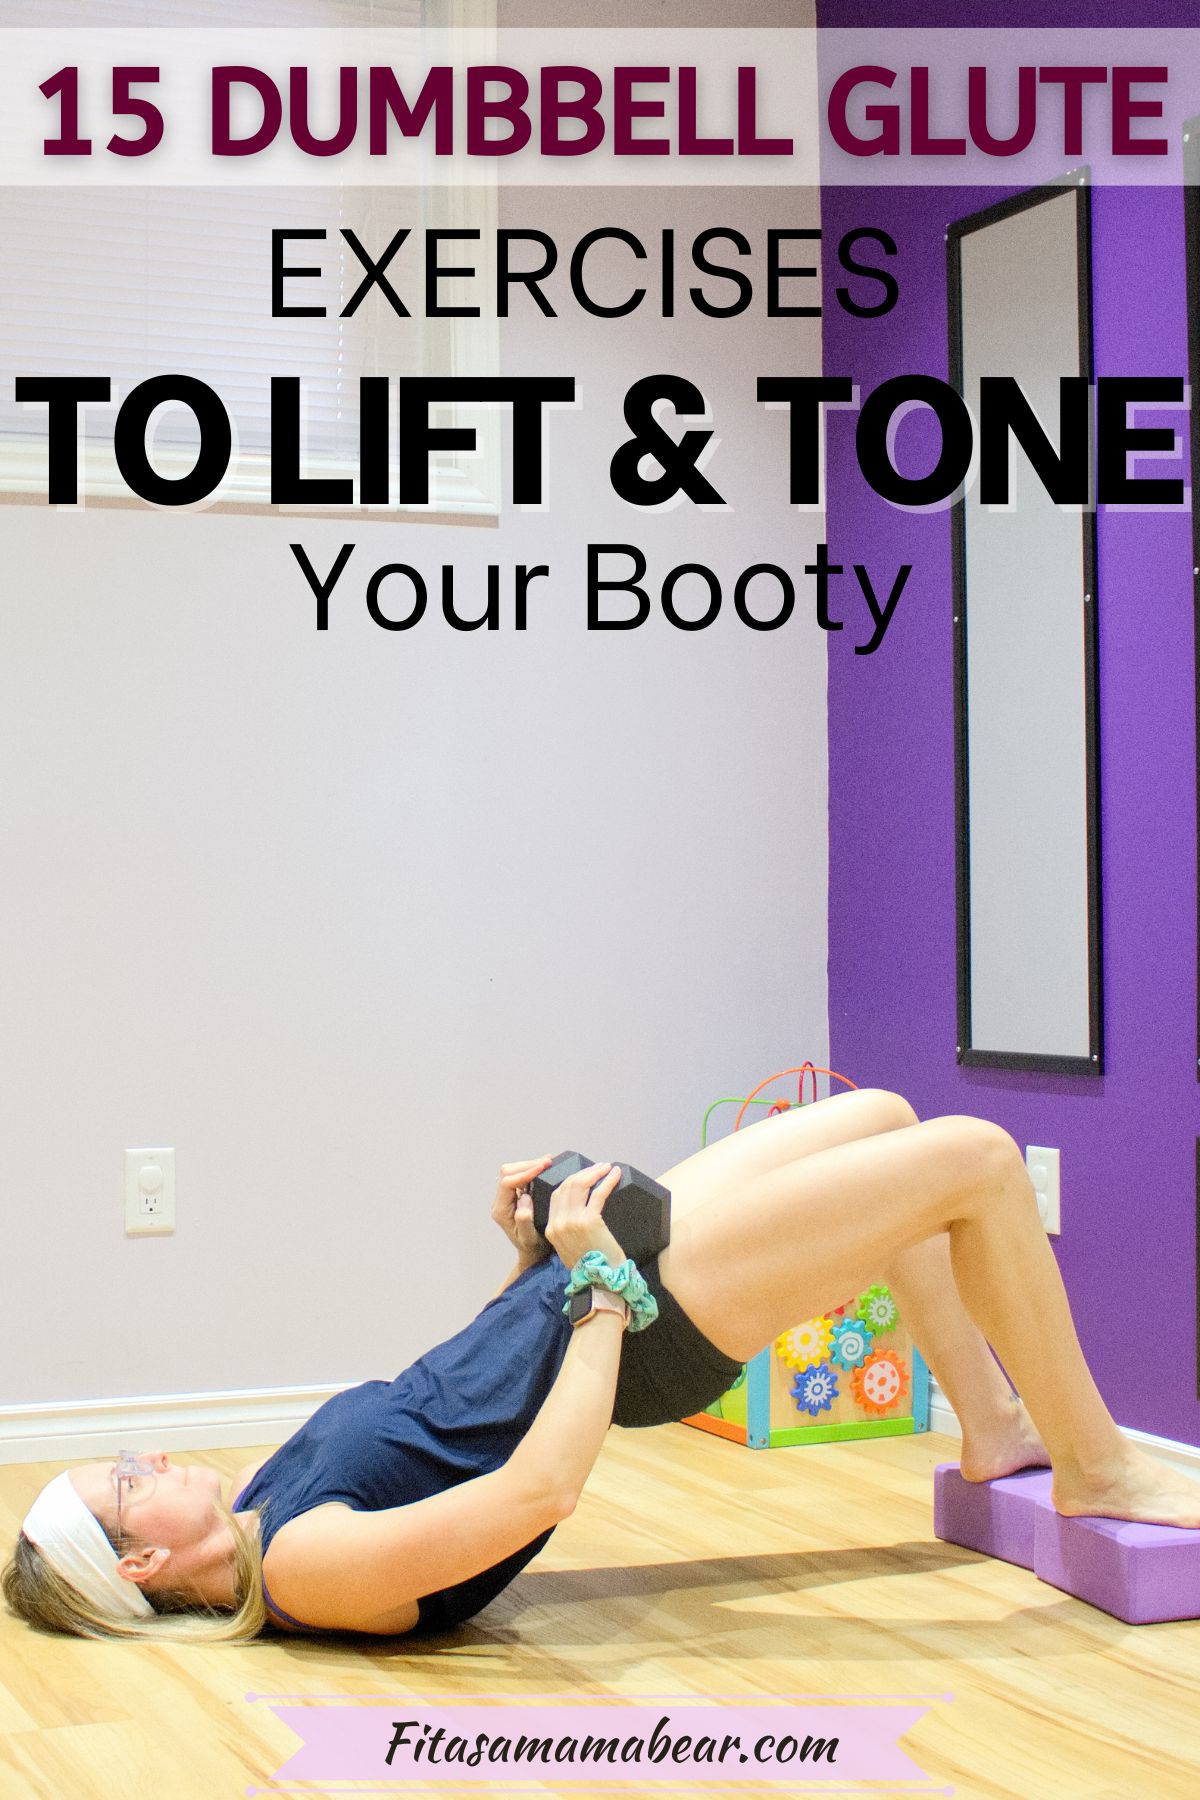 15 At-Home Butt Exercises: With Bands and Weights